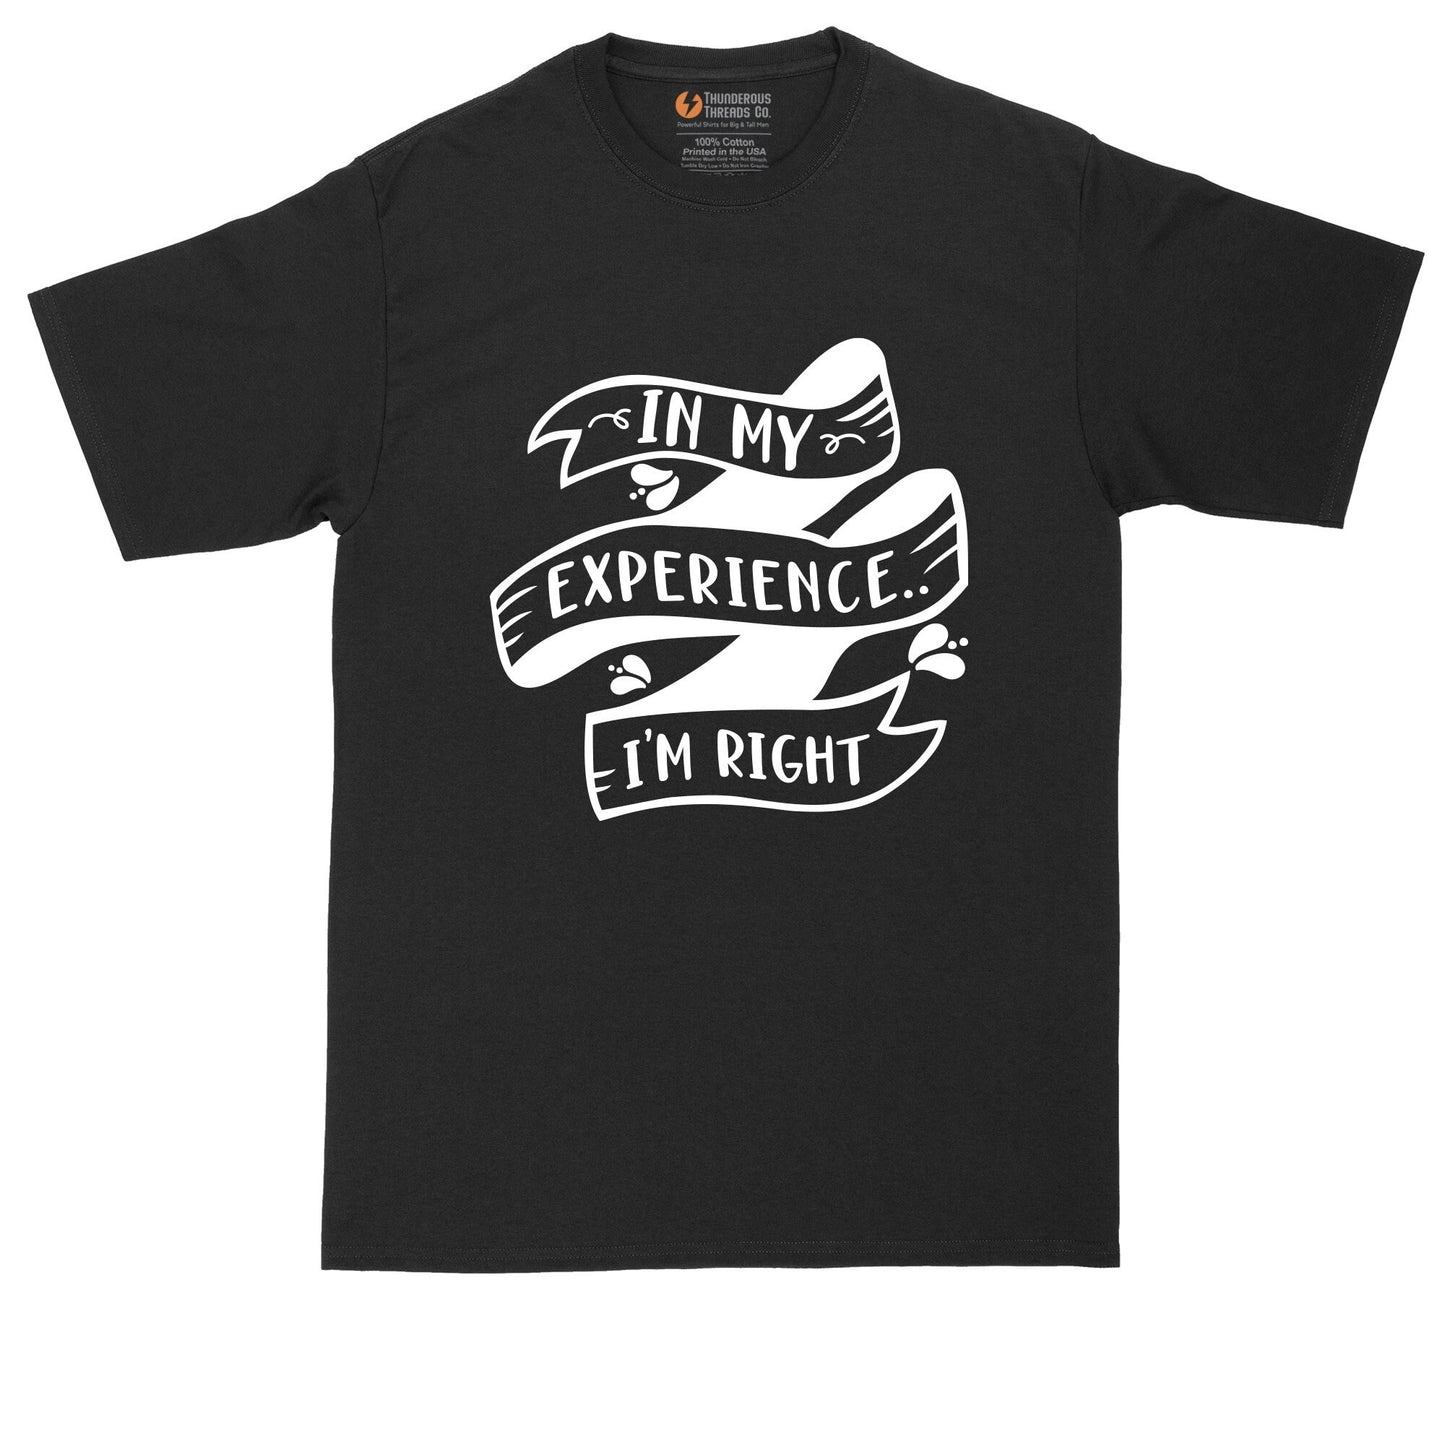 In My Experience I'm Right | Big and Tall Mens T-Shirt | Funny T-Shirt | Graphic T-Shirt